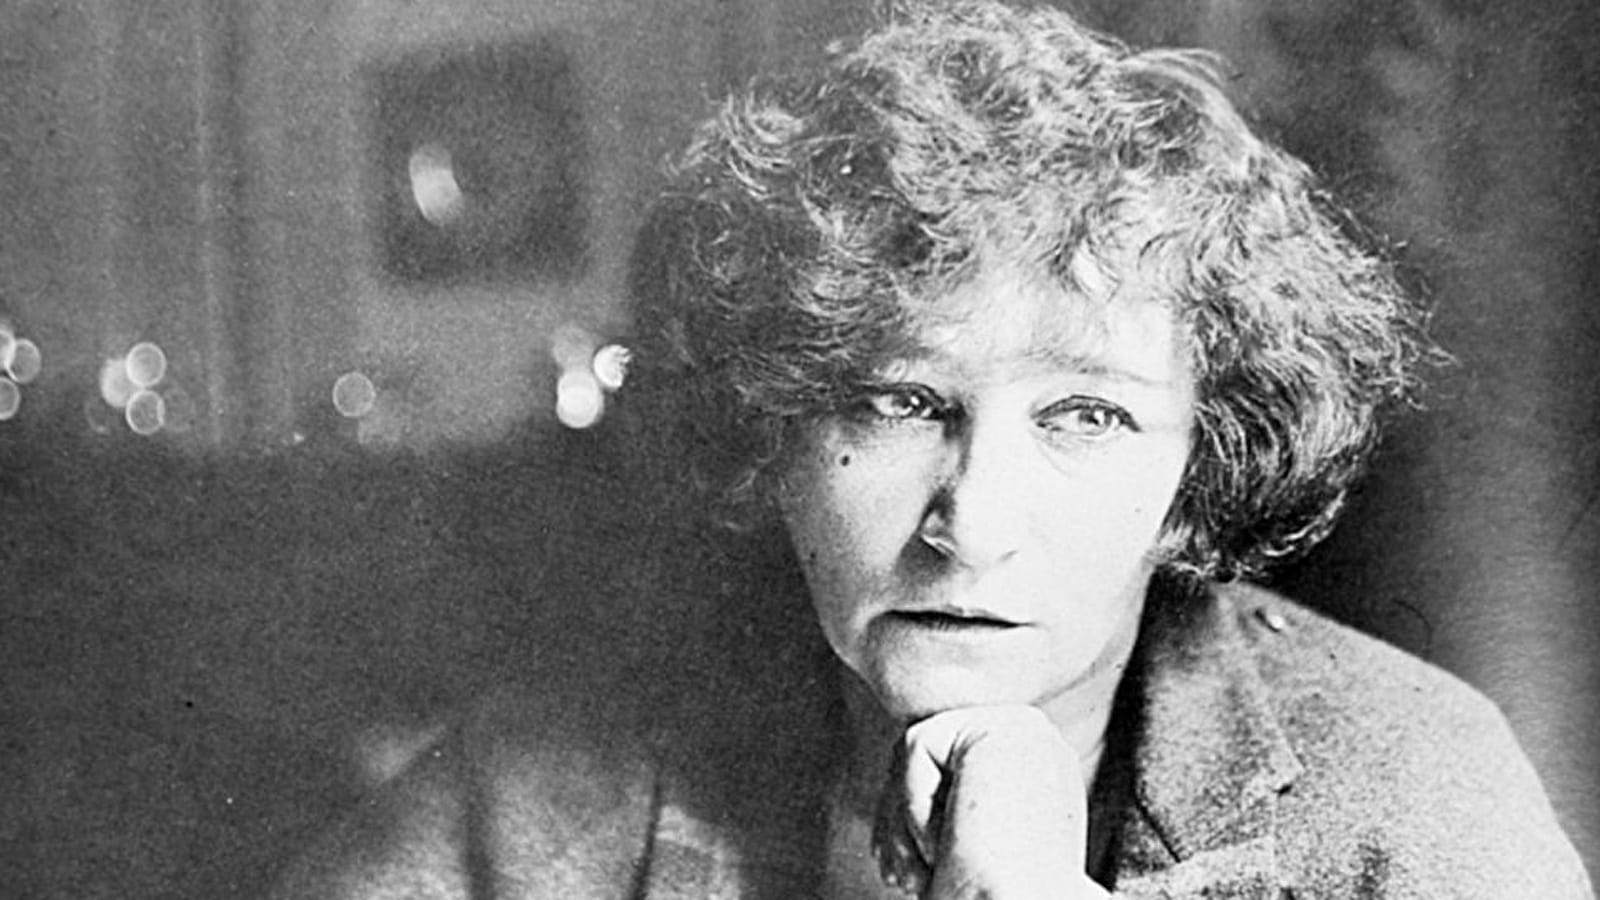 Exhibition 'Colette, free and revolutionary